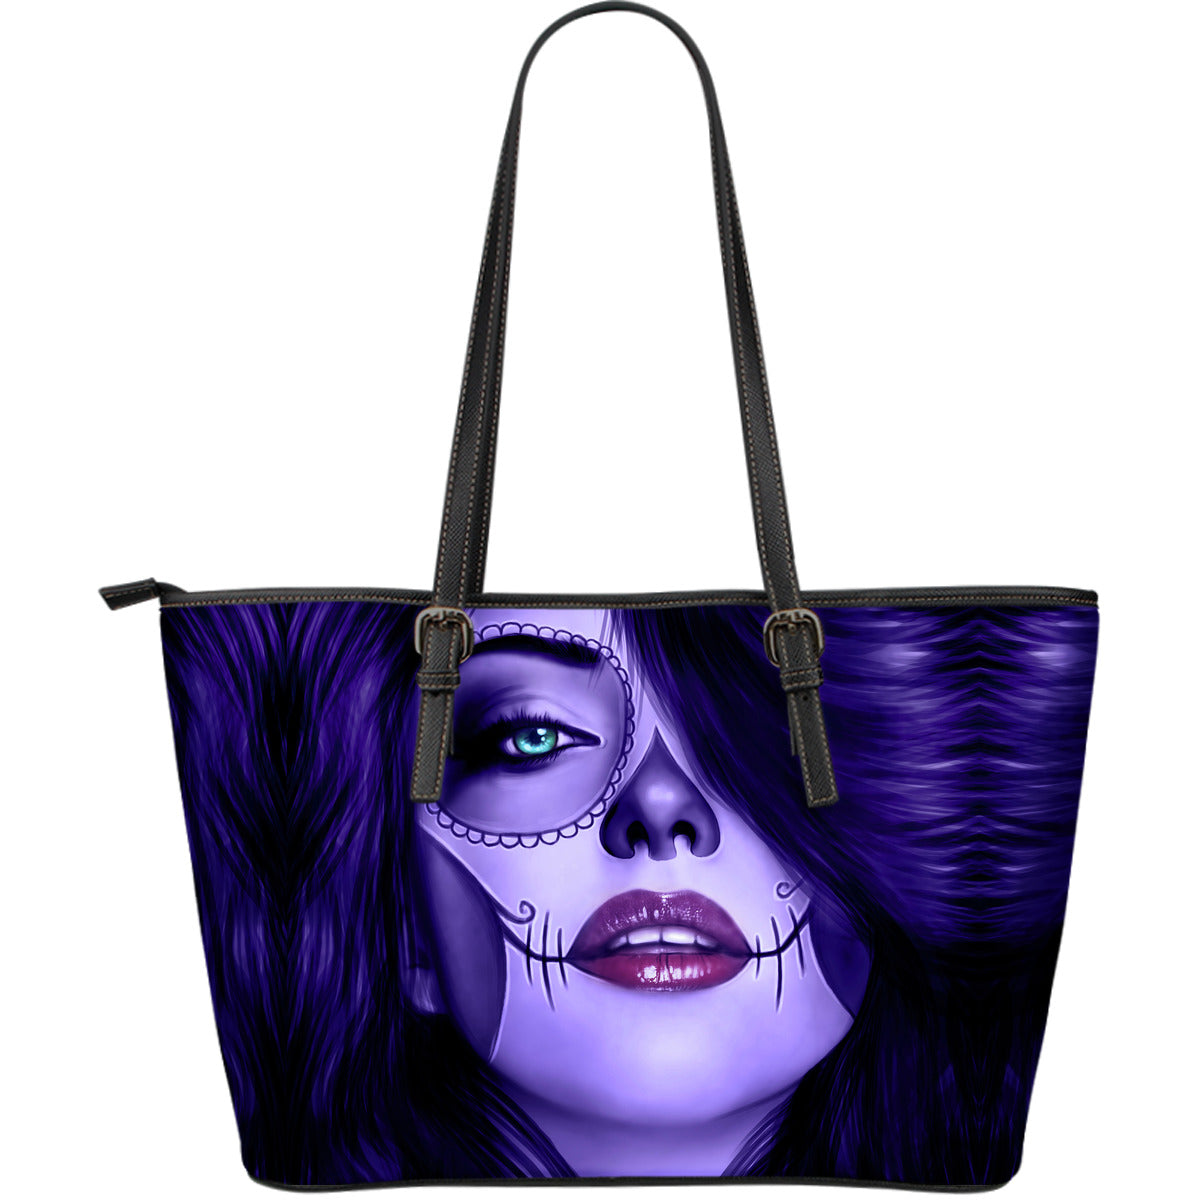 Tattoo Calavera Girl Large Leather Tote Bag - Collection 3